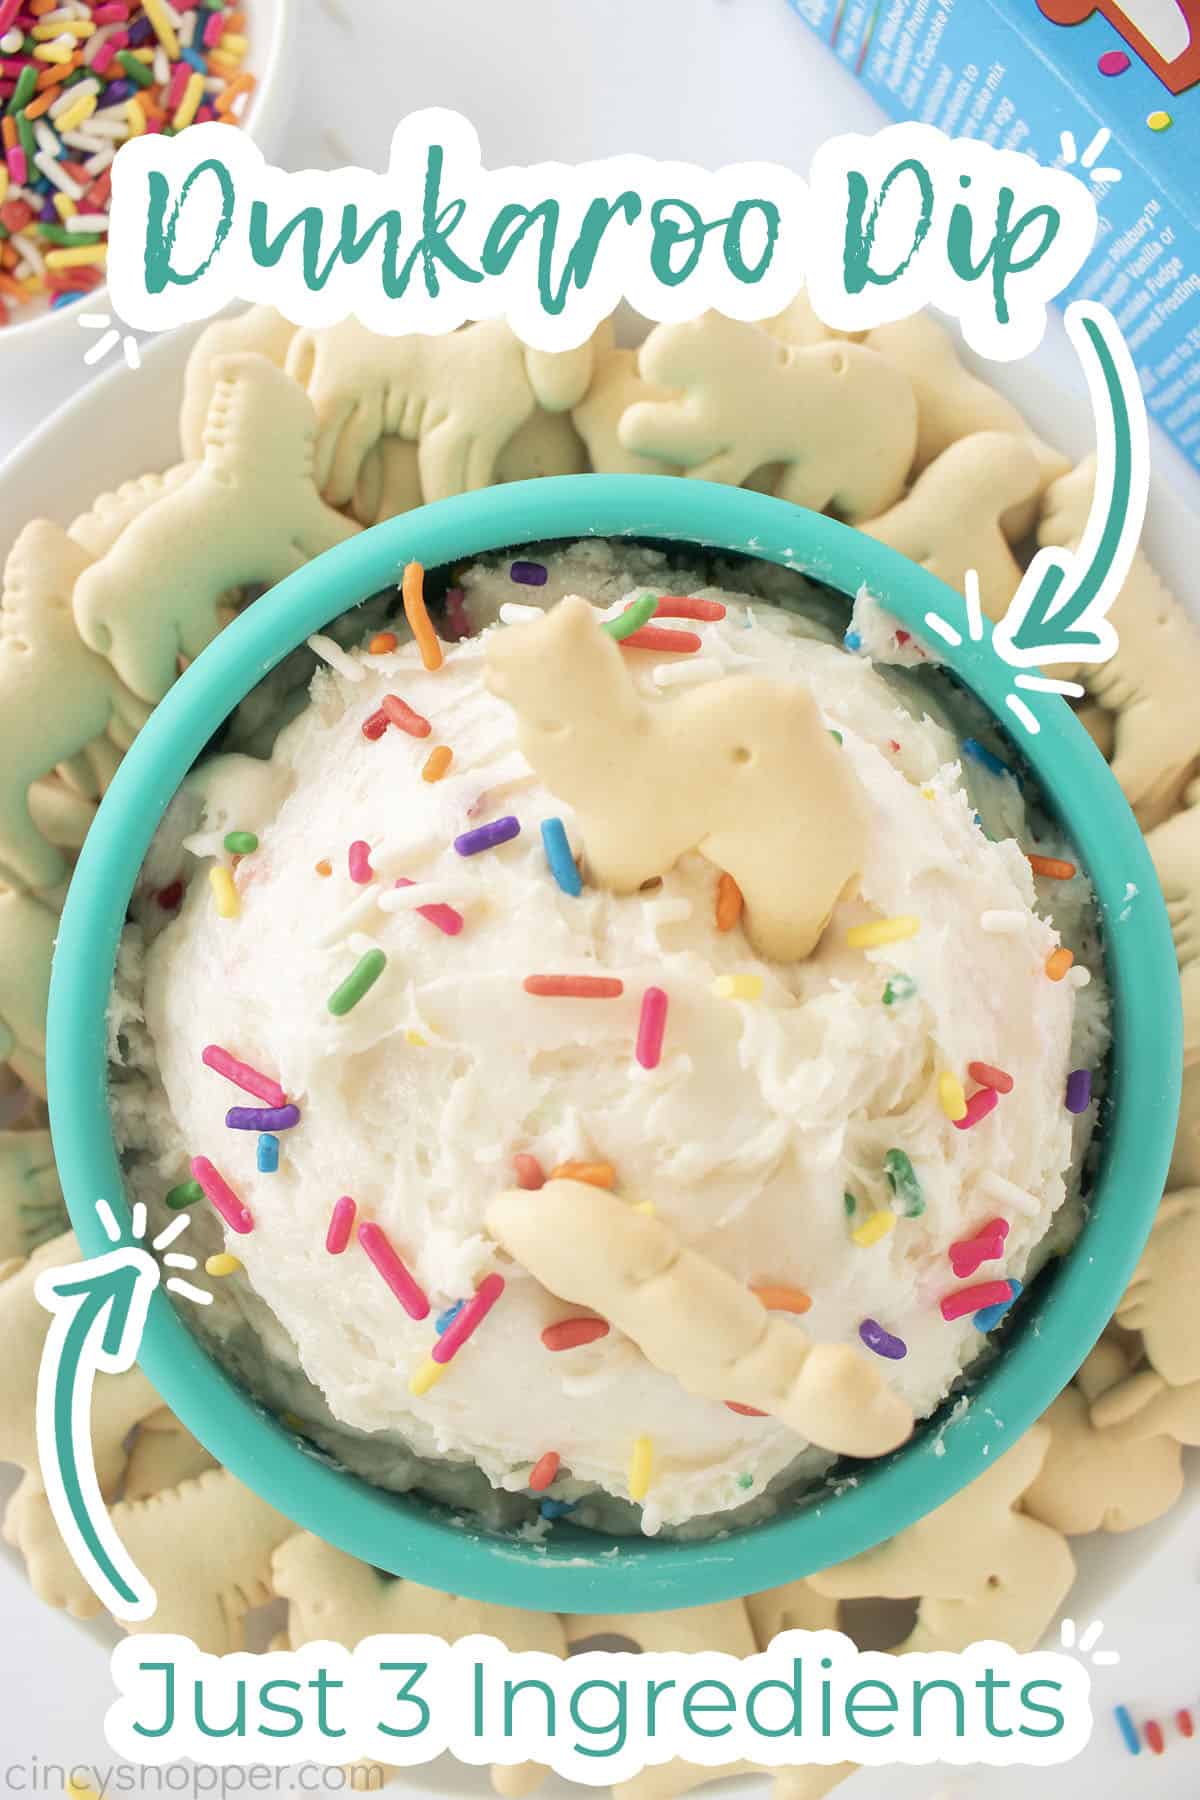 Text on image Dunkaroo Dip Made with just 3 ingredients.